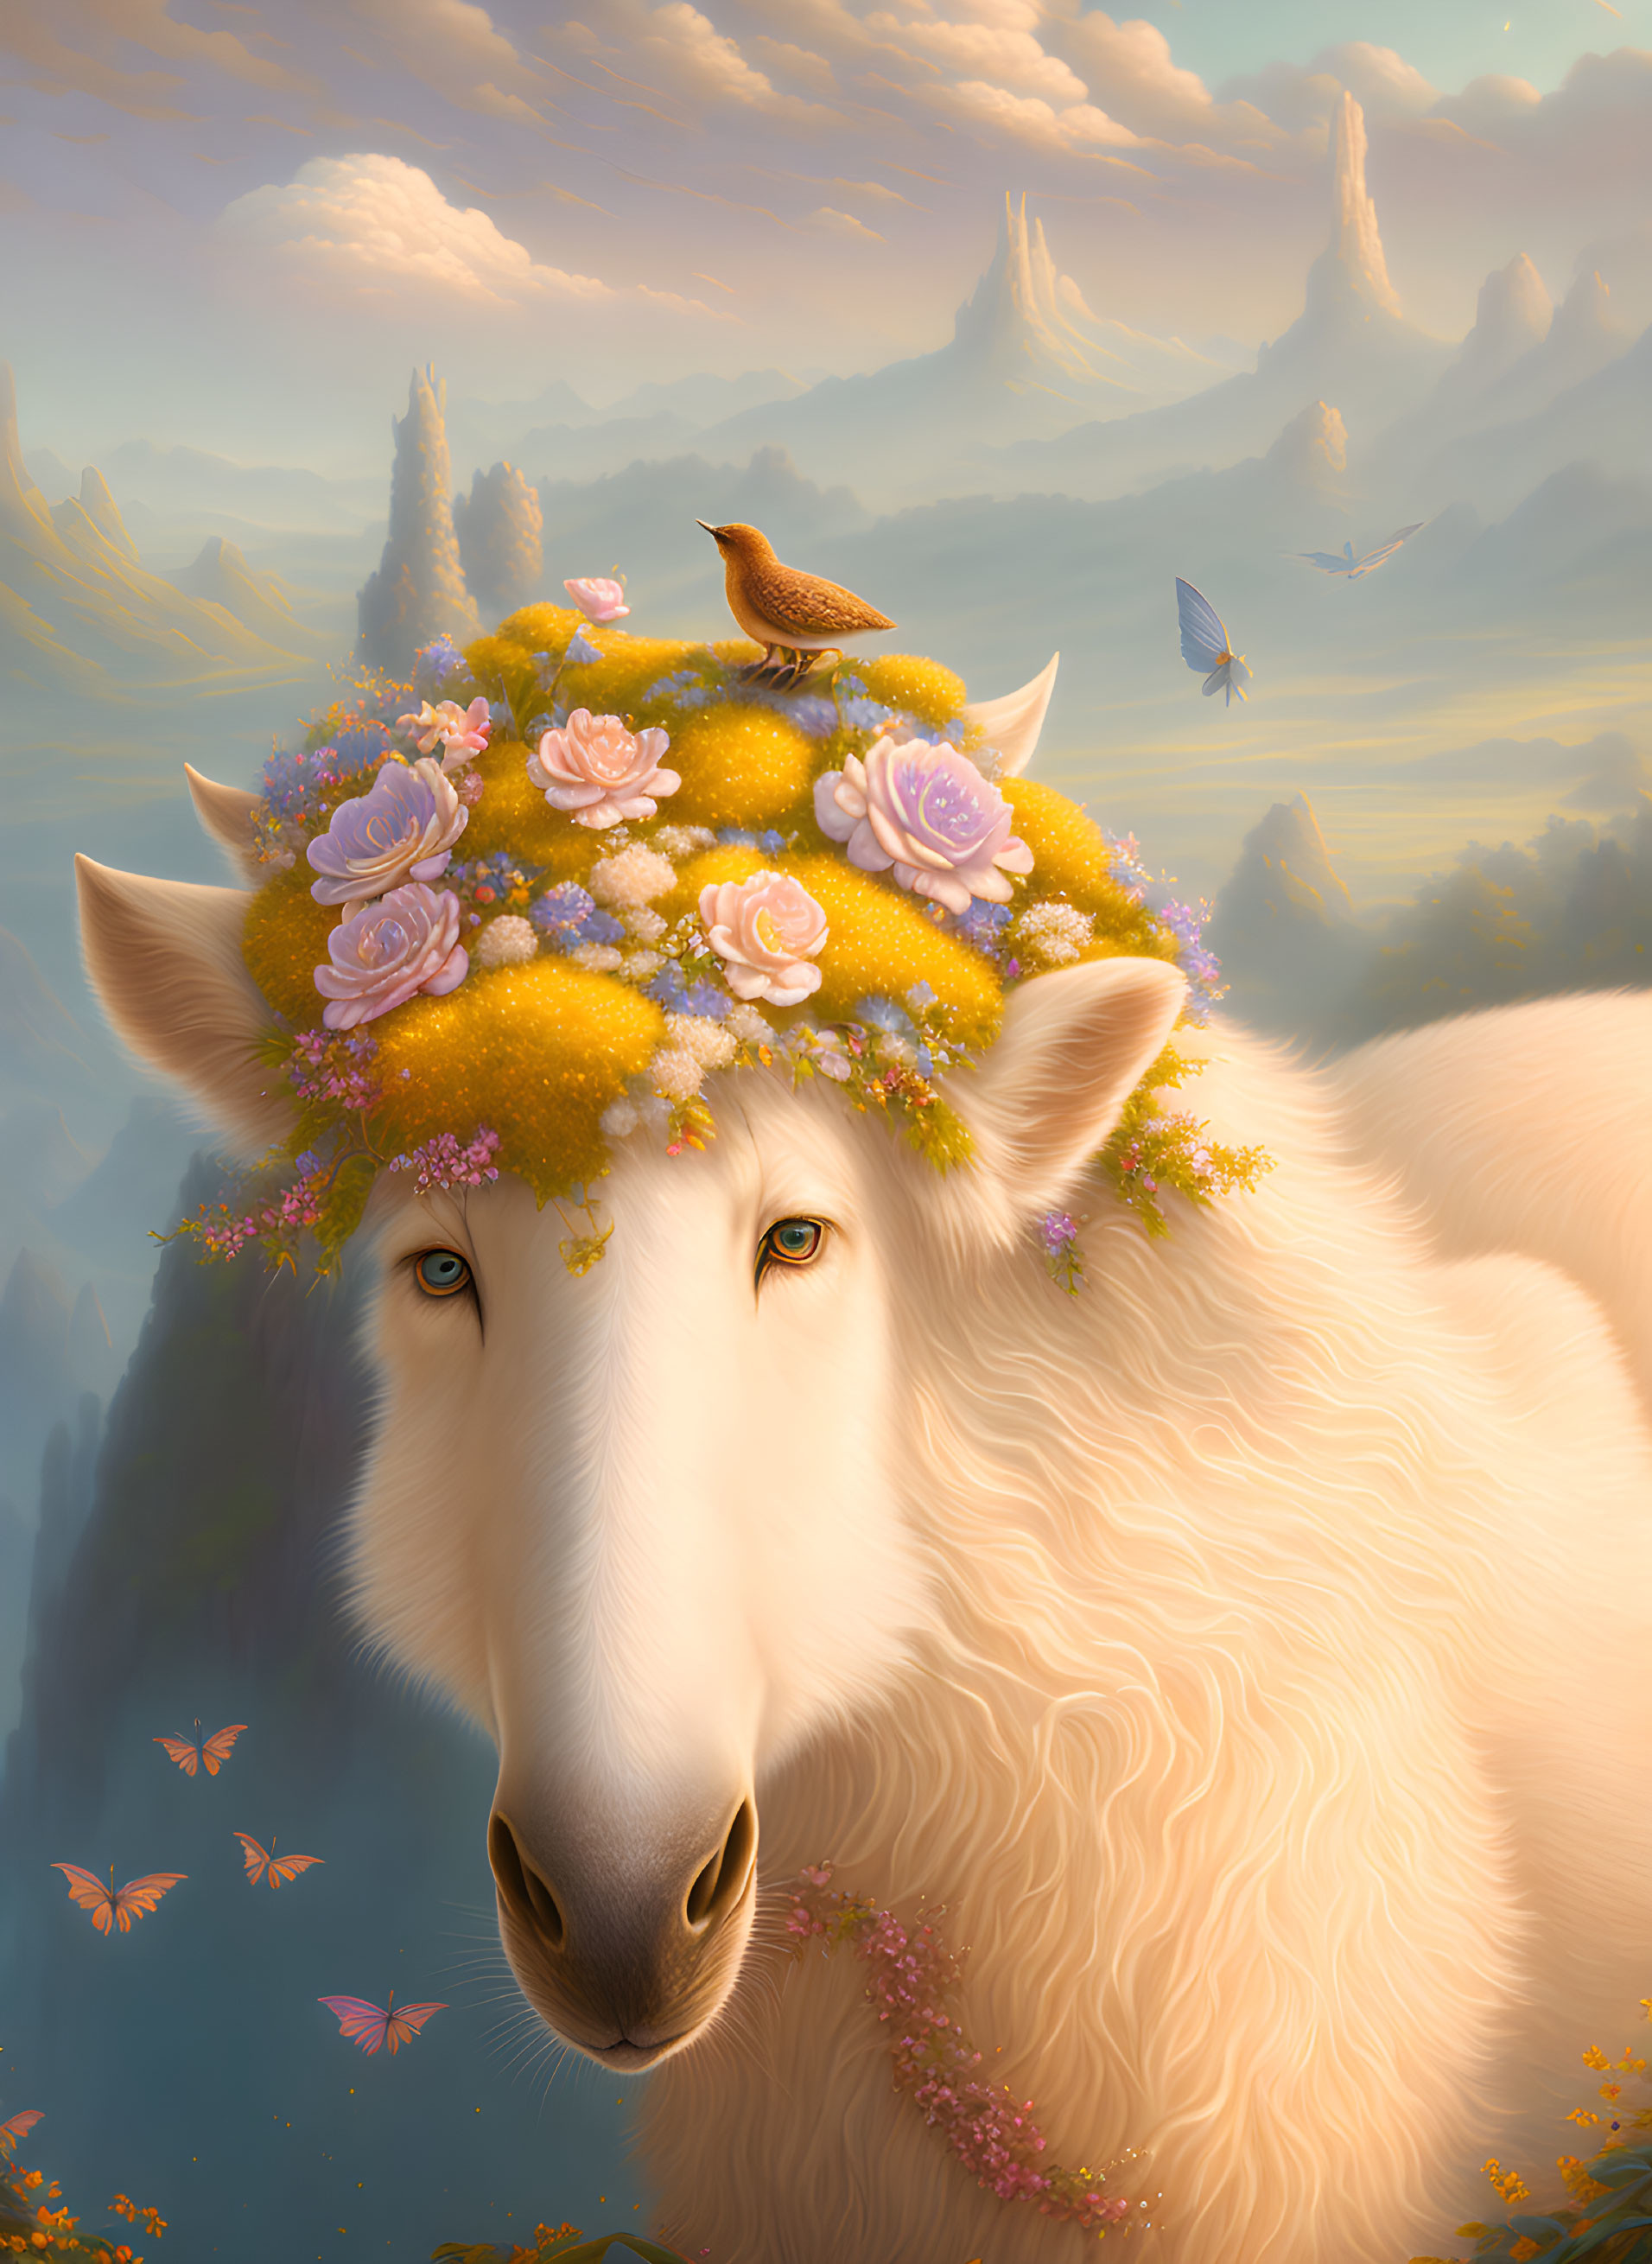 Fantasy illustration of white wolf with flower crown and bird, surrounded by butterflies